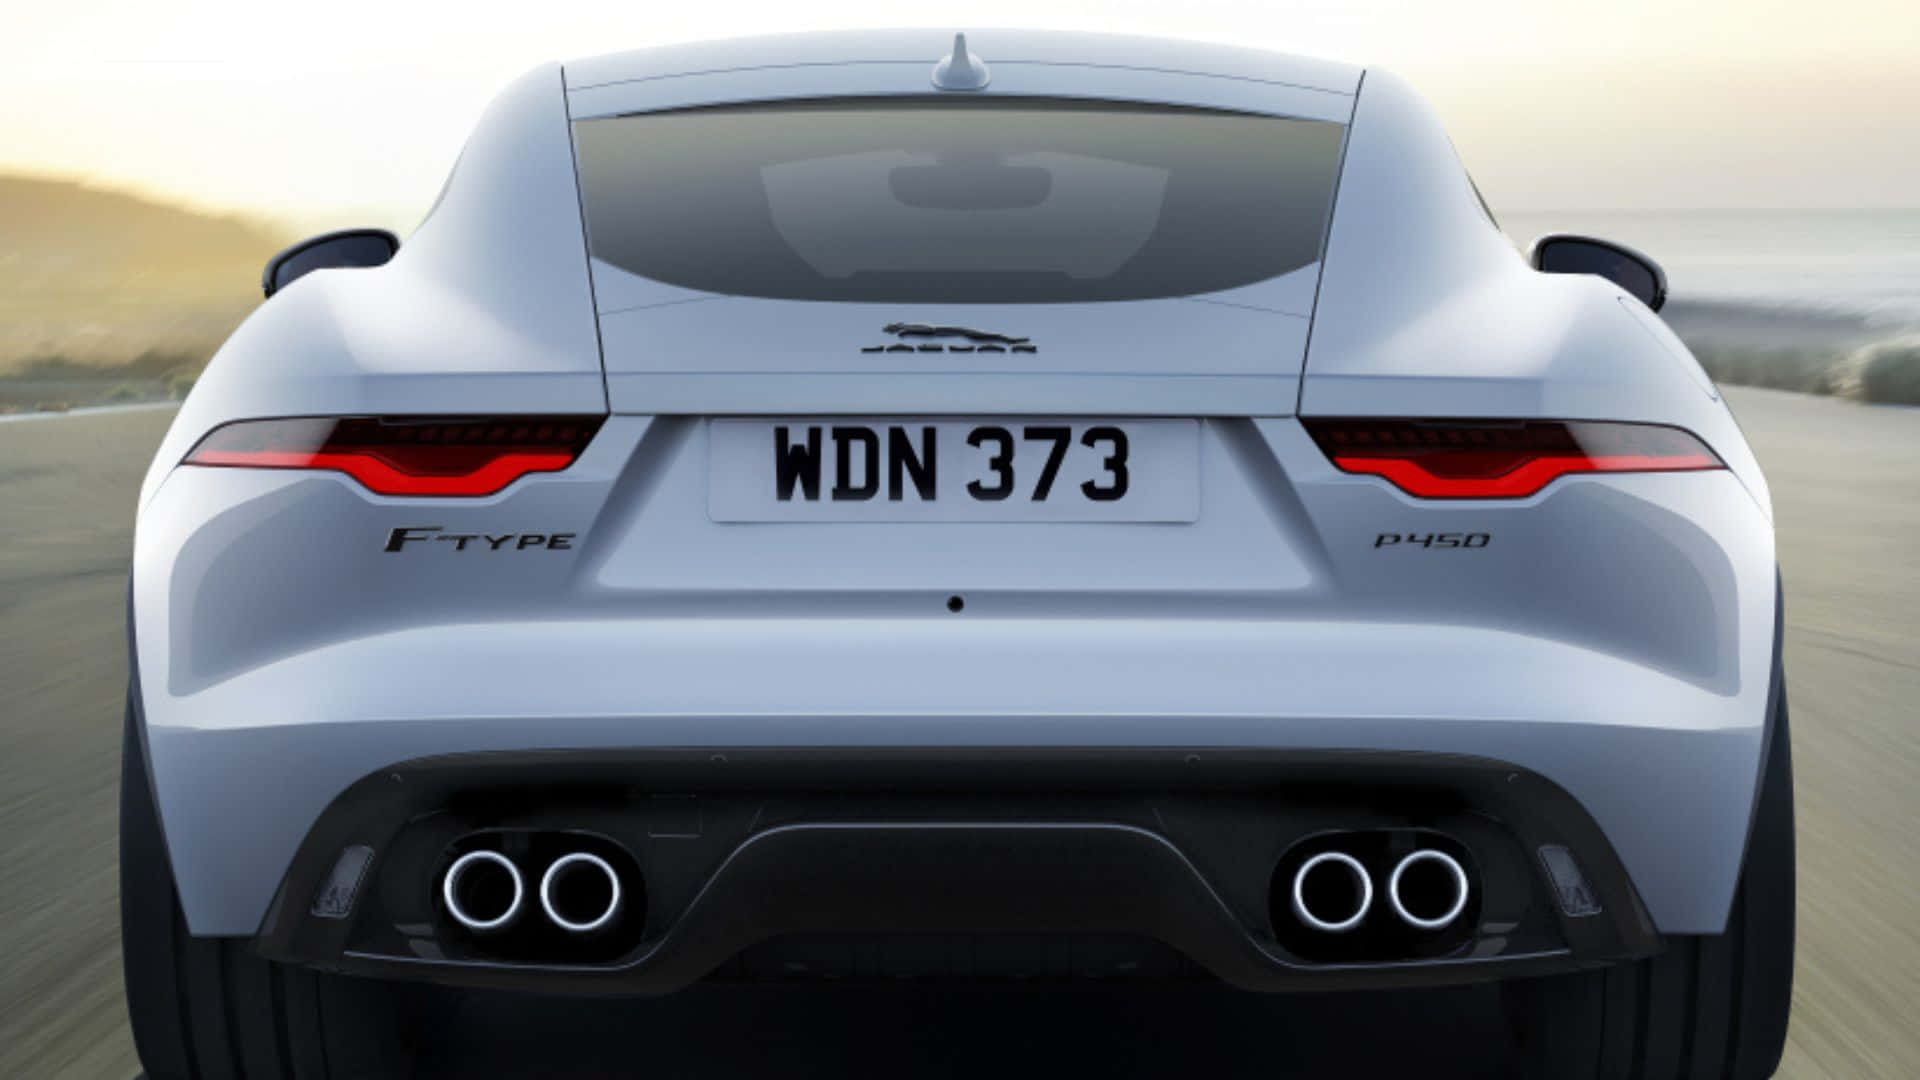 Caption: Bold Luxury Redefined In Motion - The Red Jaguar F-type Wallpaper